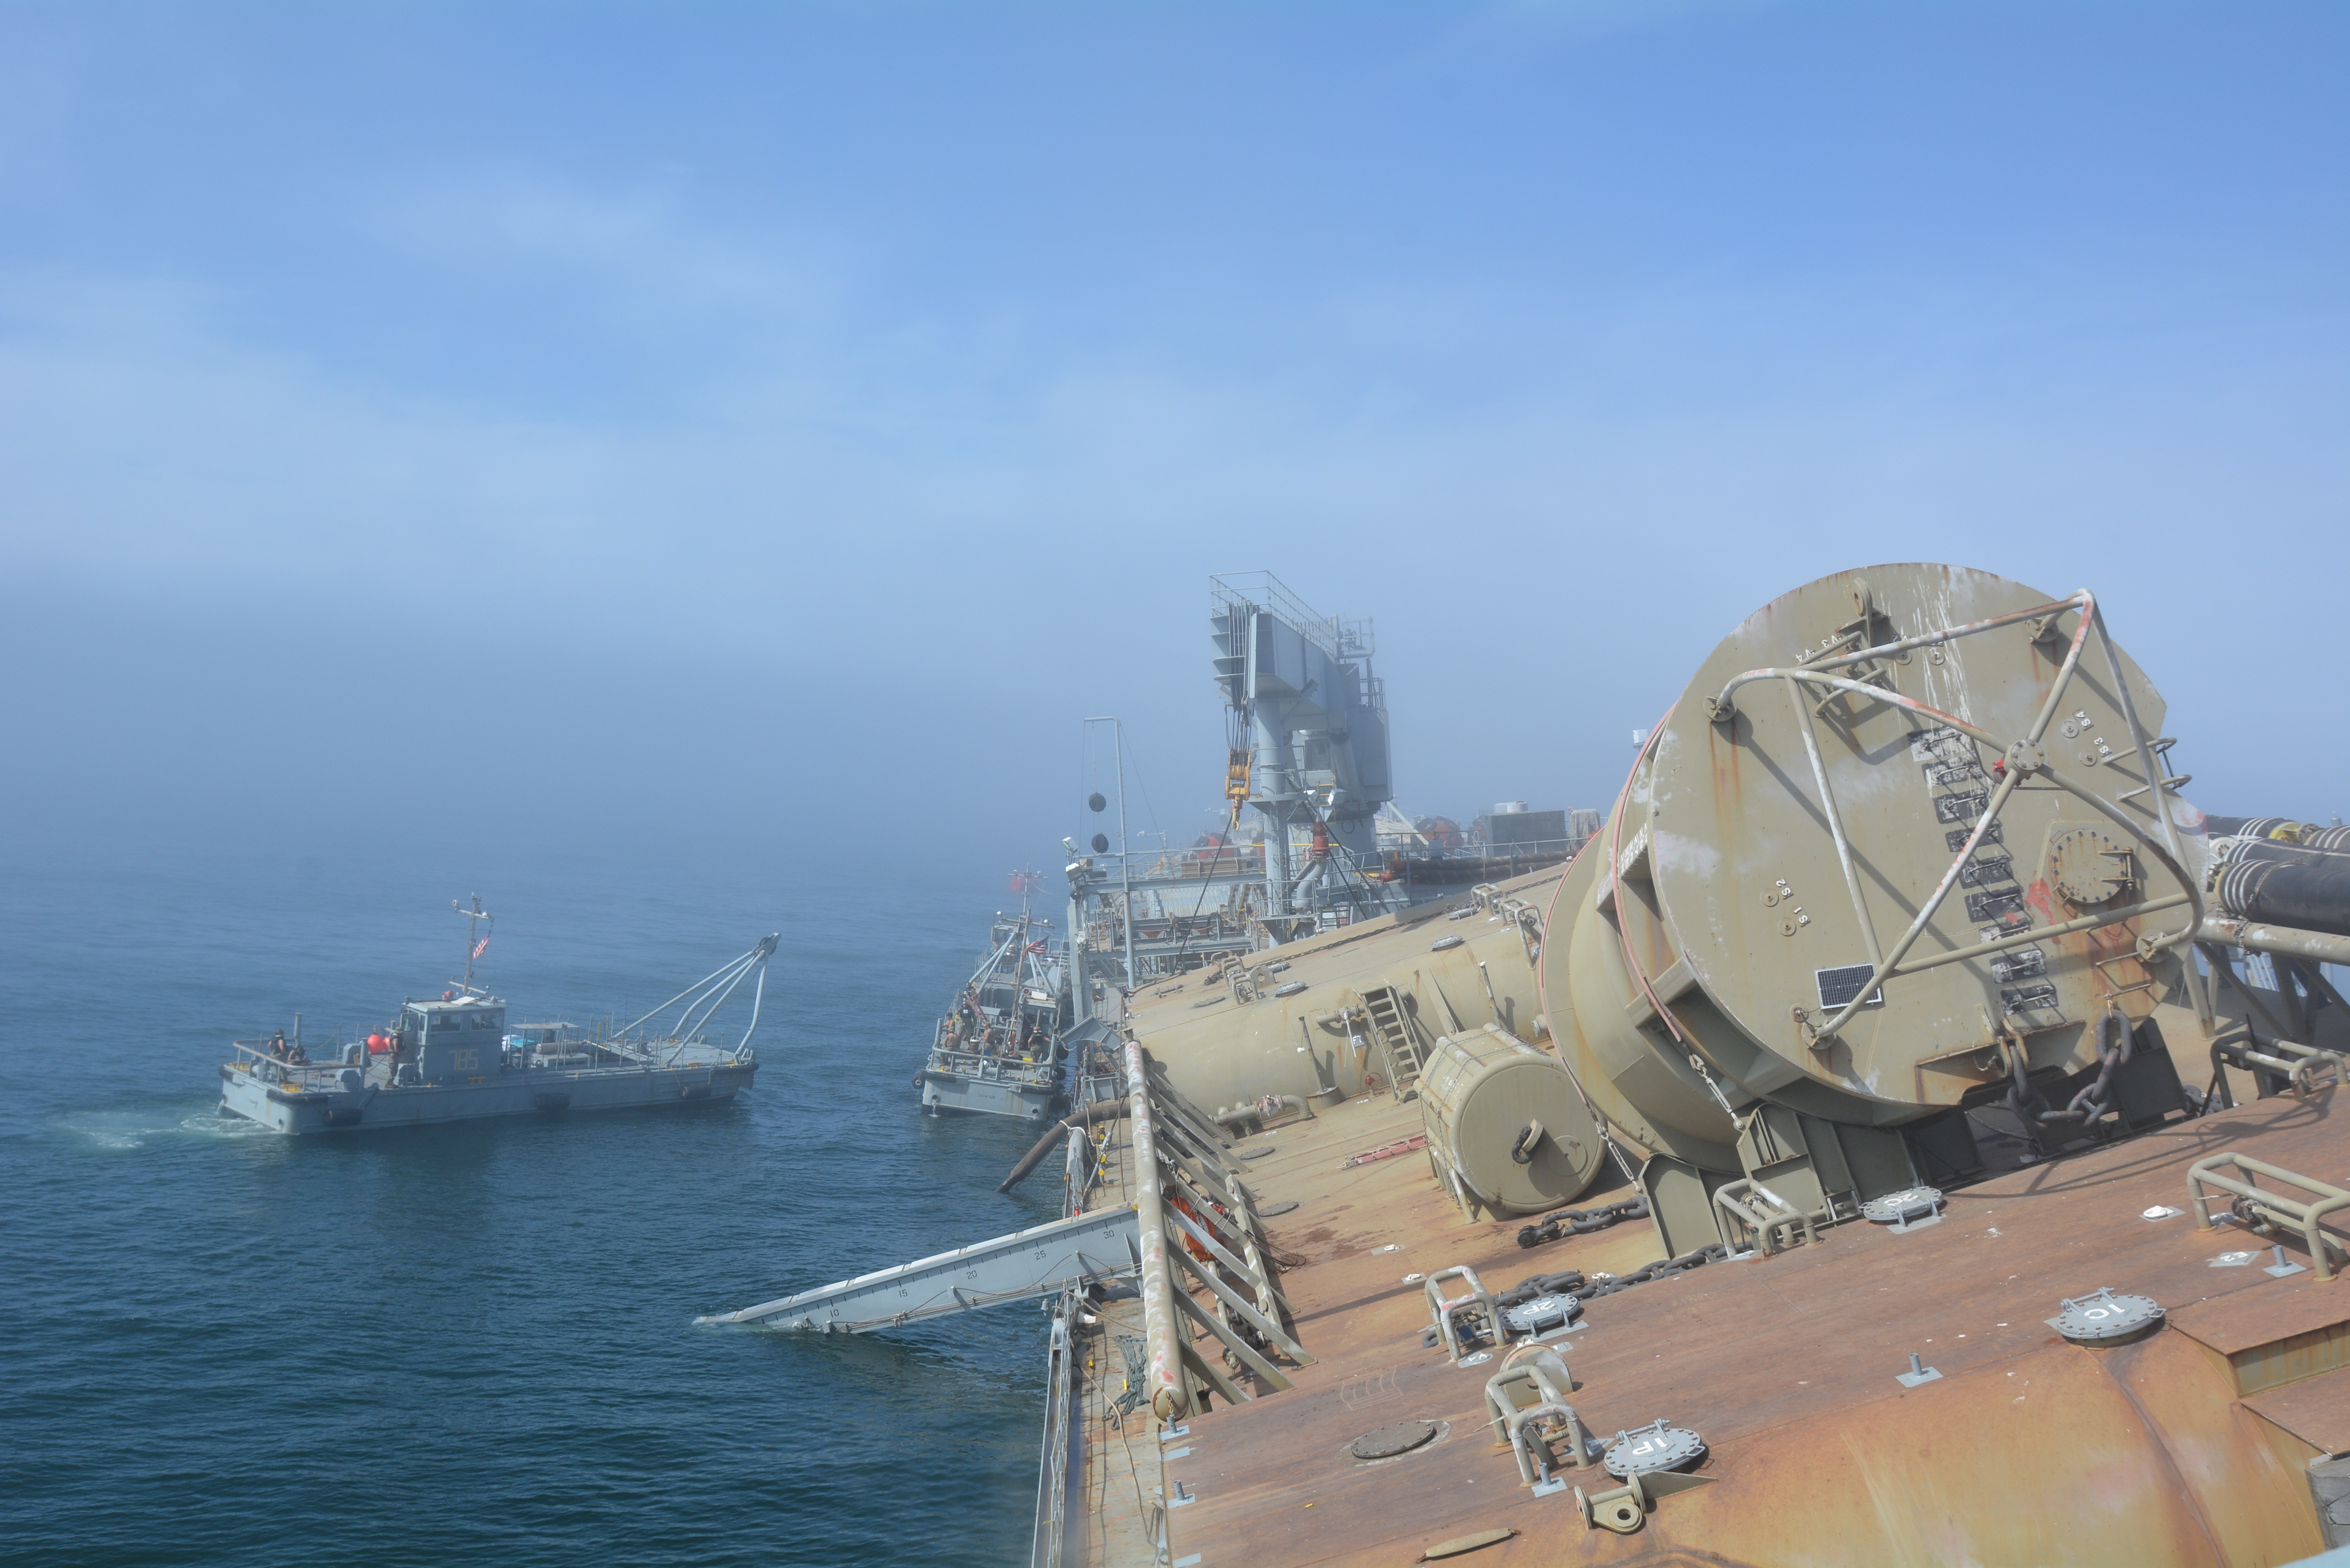 Seabees assigned to Amphibious Construction Battalion 1 approach the Military Sealift Command government-owned tanker ship SS Petersburg during Arctic Expeditionary Capabilities Exercise 2019 off the coast of San Diego. The ship sits in a 12-degree list as it deploys a single-anchor leg mooring buoy, the first of this type of exercise conducted in Southern California. (U.S. Navy photo by Sarah Burford)